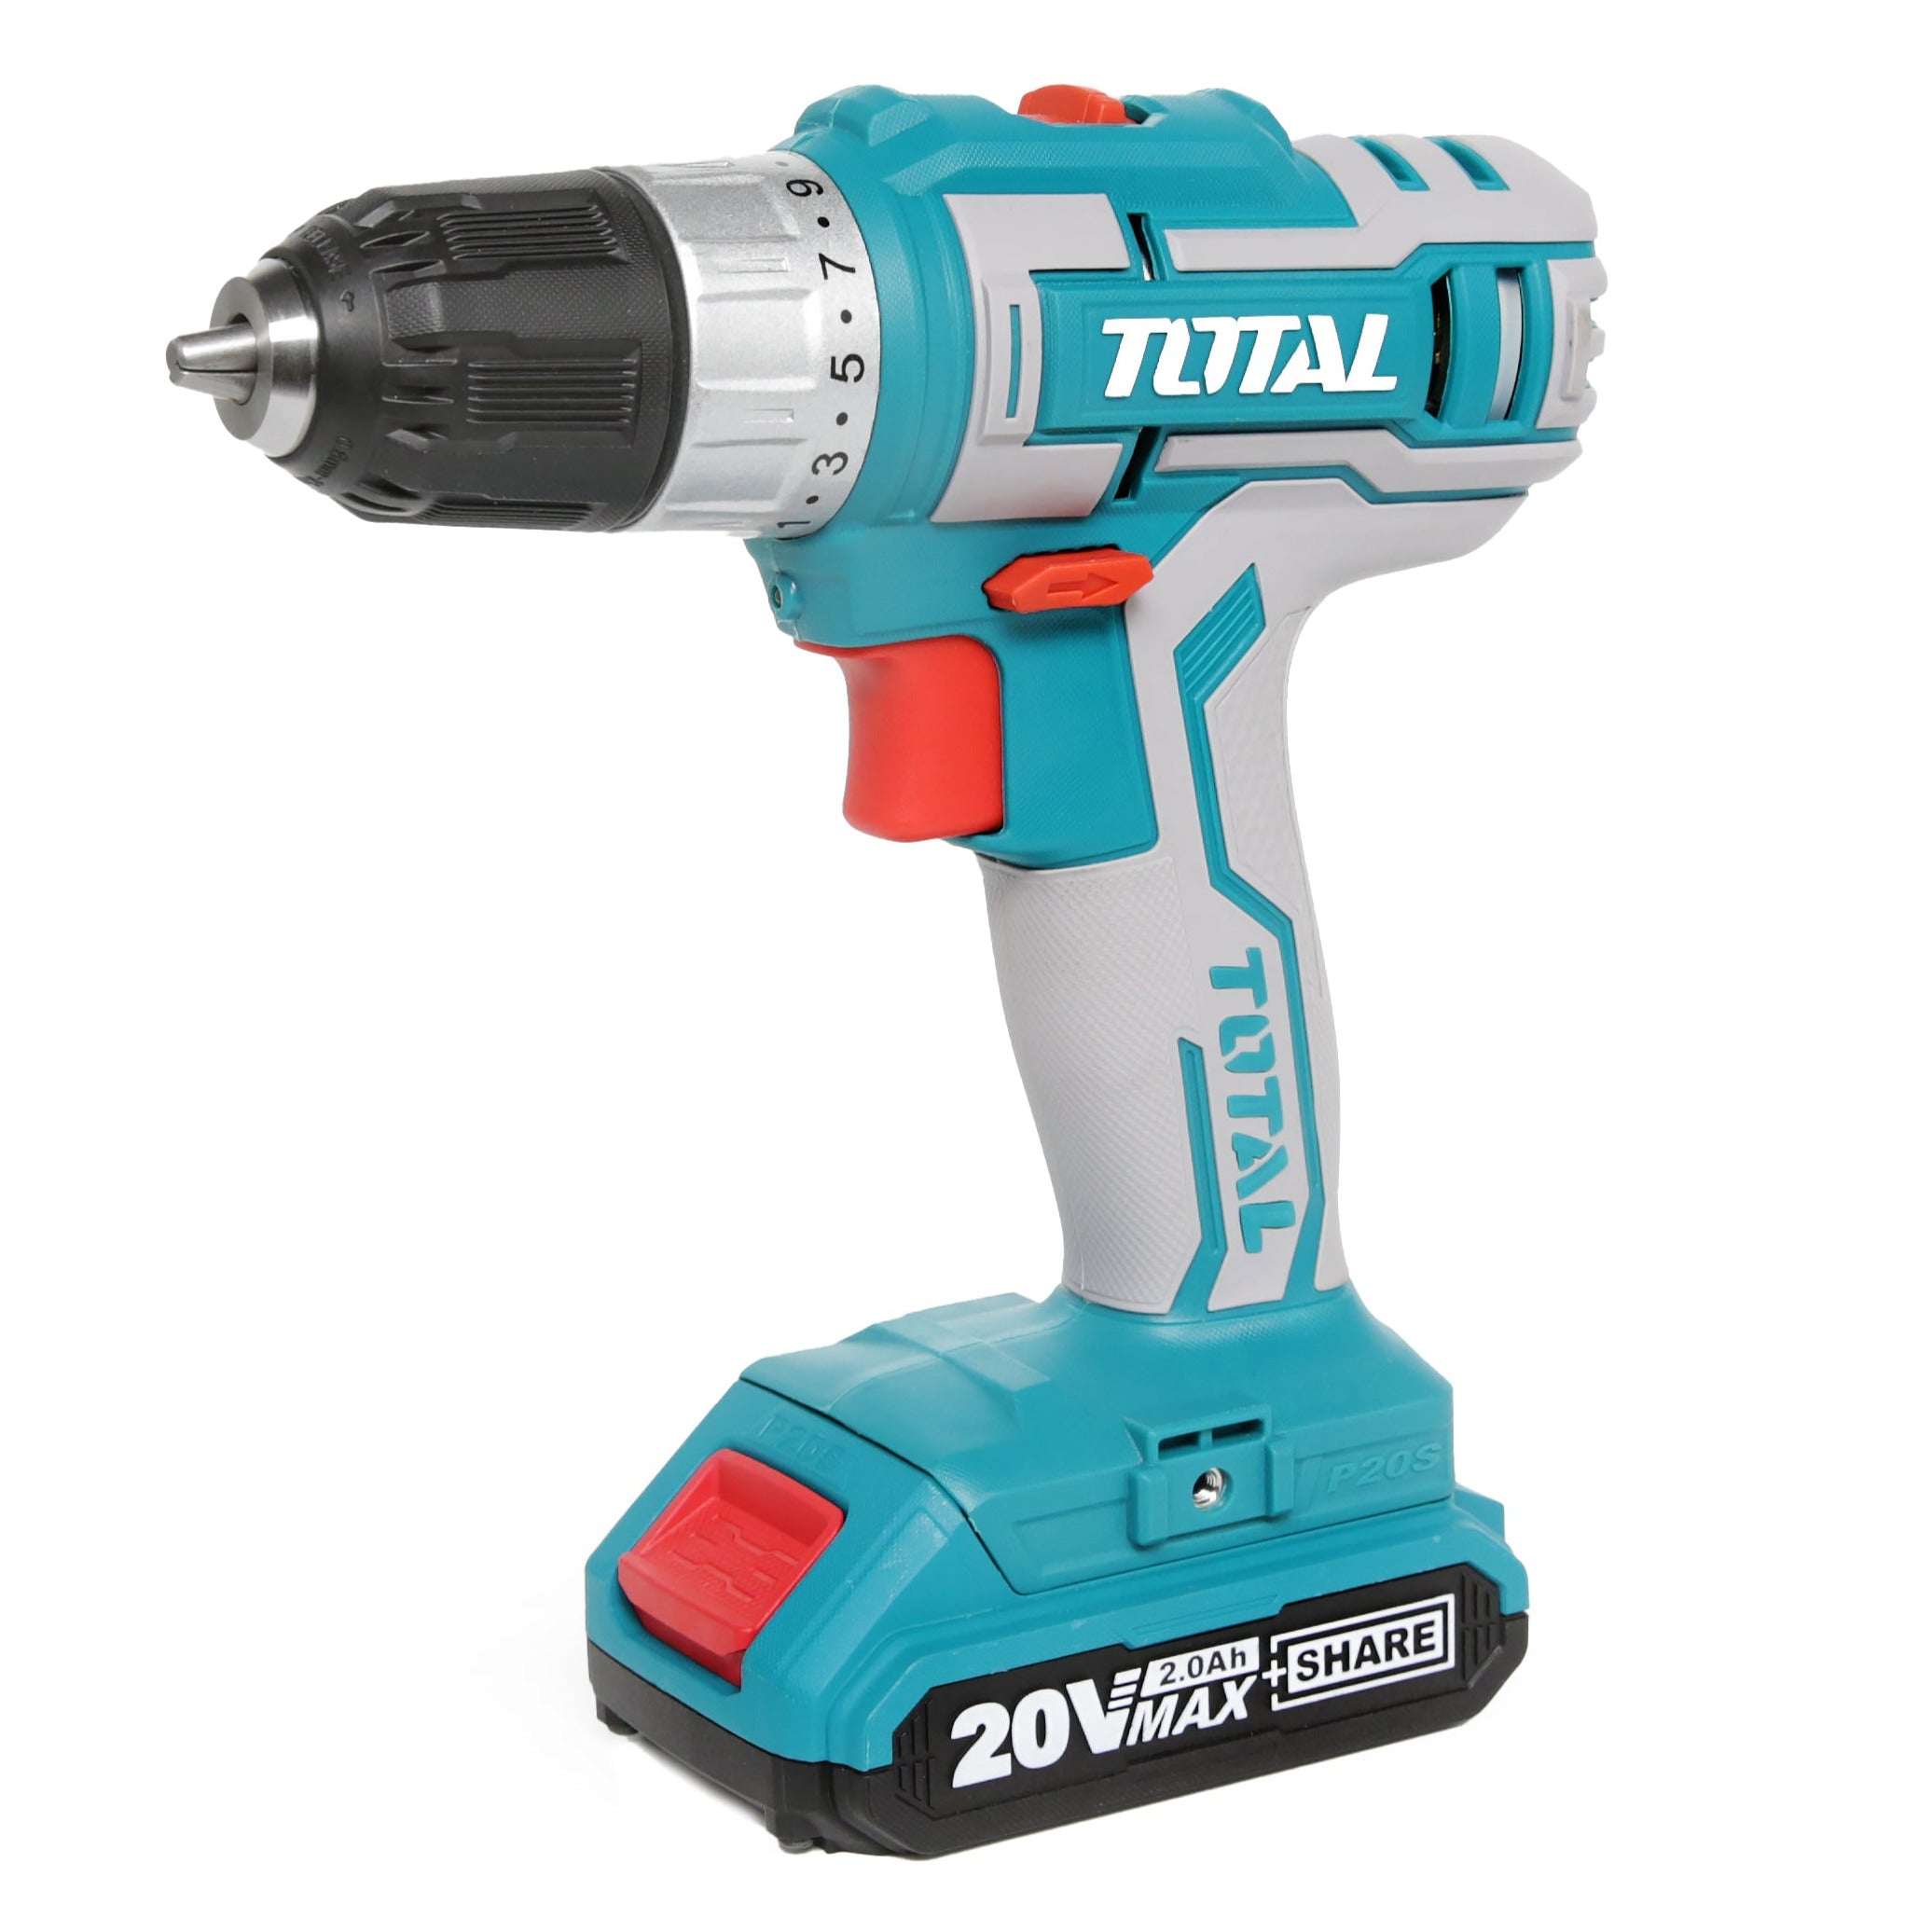 Total Li-Ion 20V Cordless Drill (with Battery & Charger) - TDLI20021E